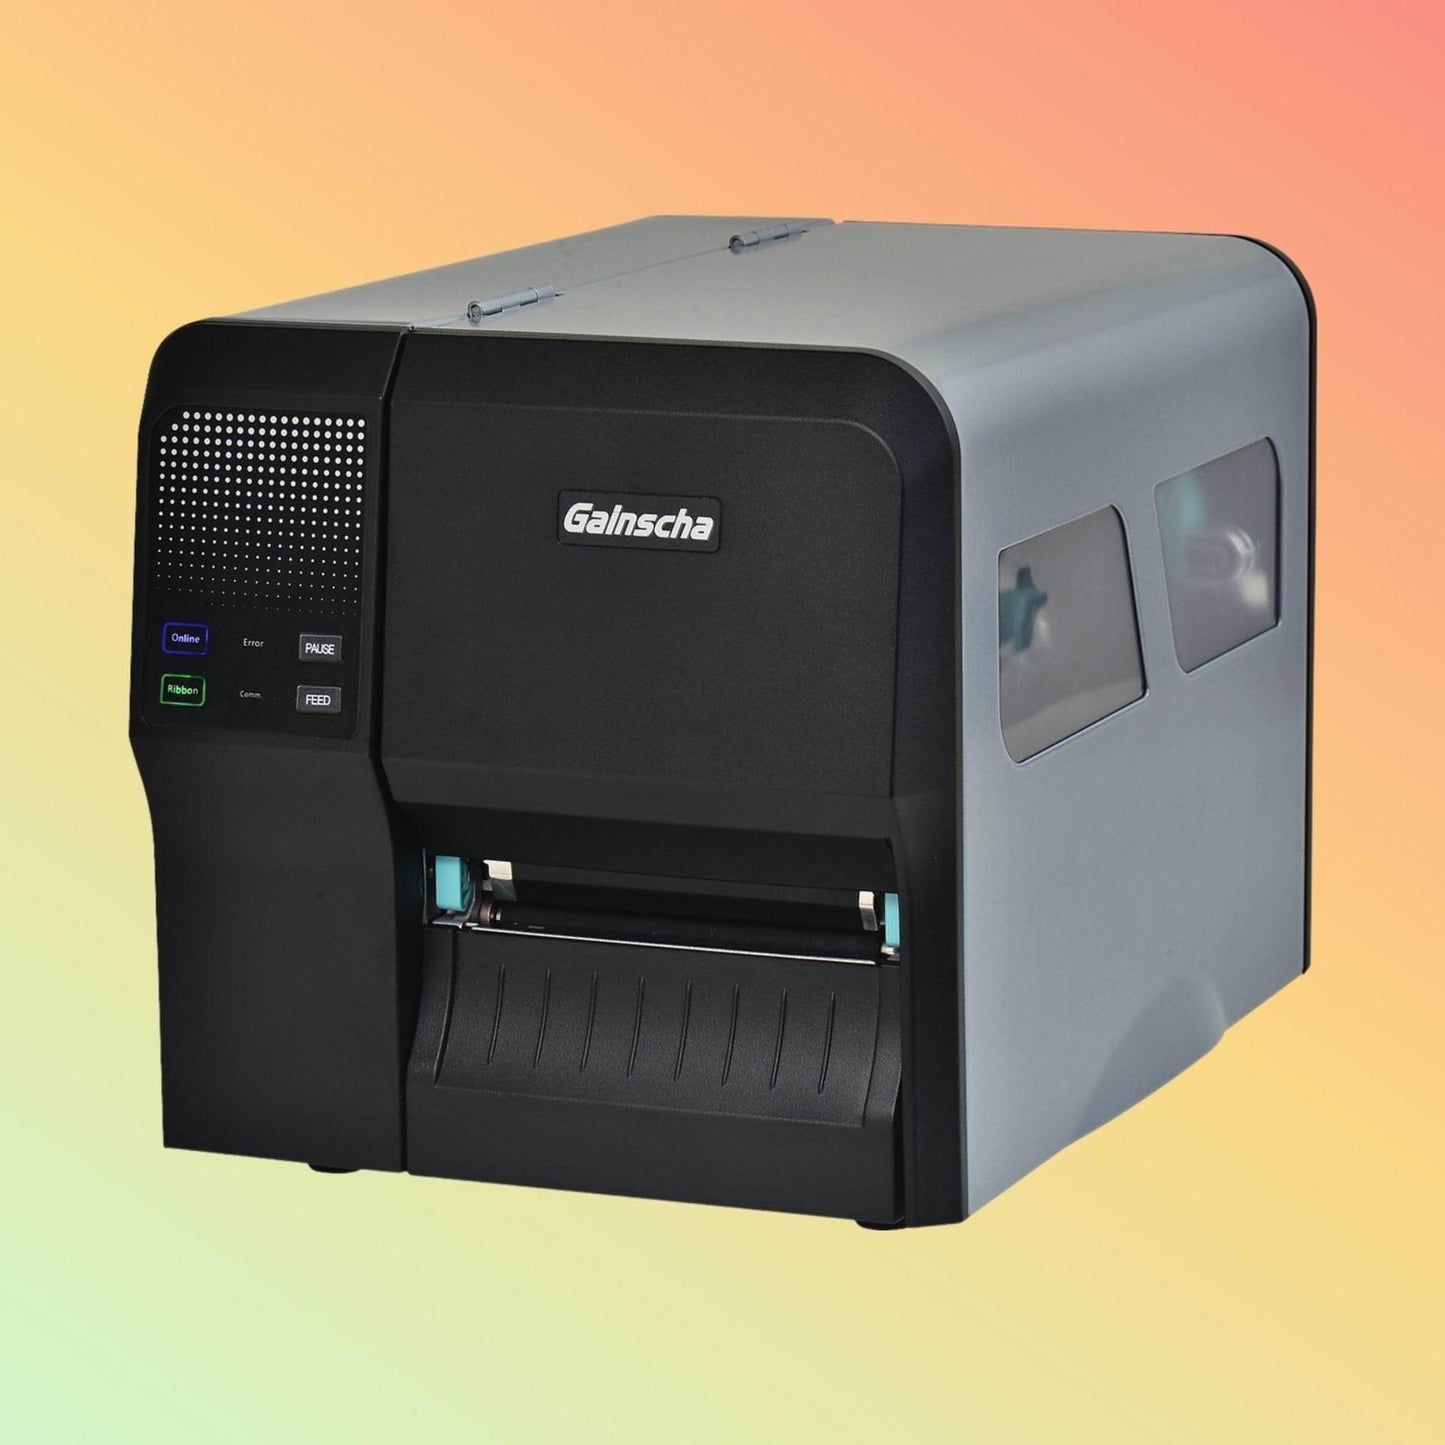 "Robust Gainscha GI-2408T printer for clear, precise industrial labels, versatile connectivity, and wide format support."